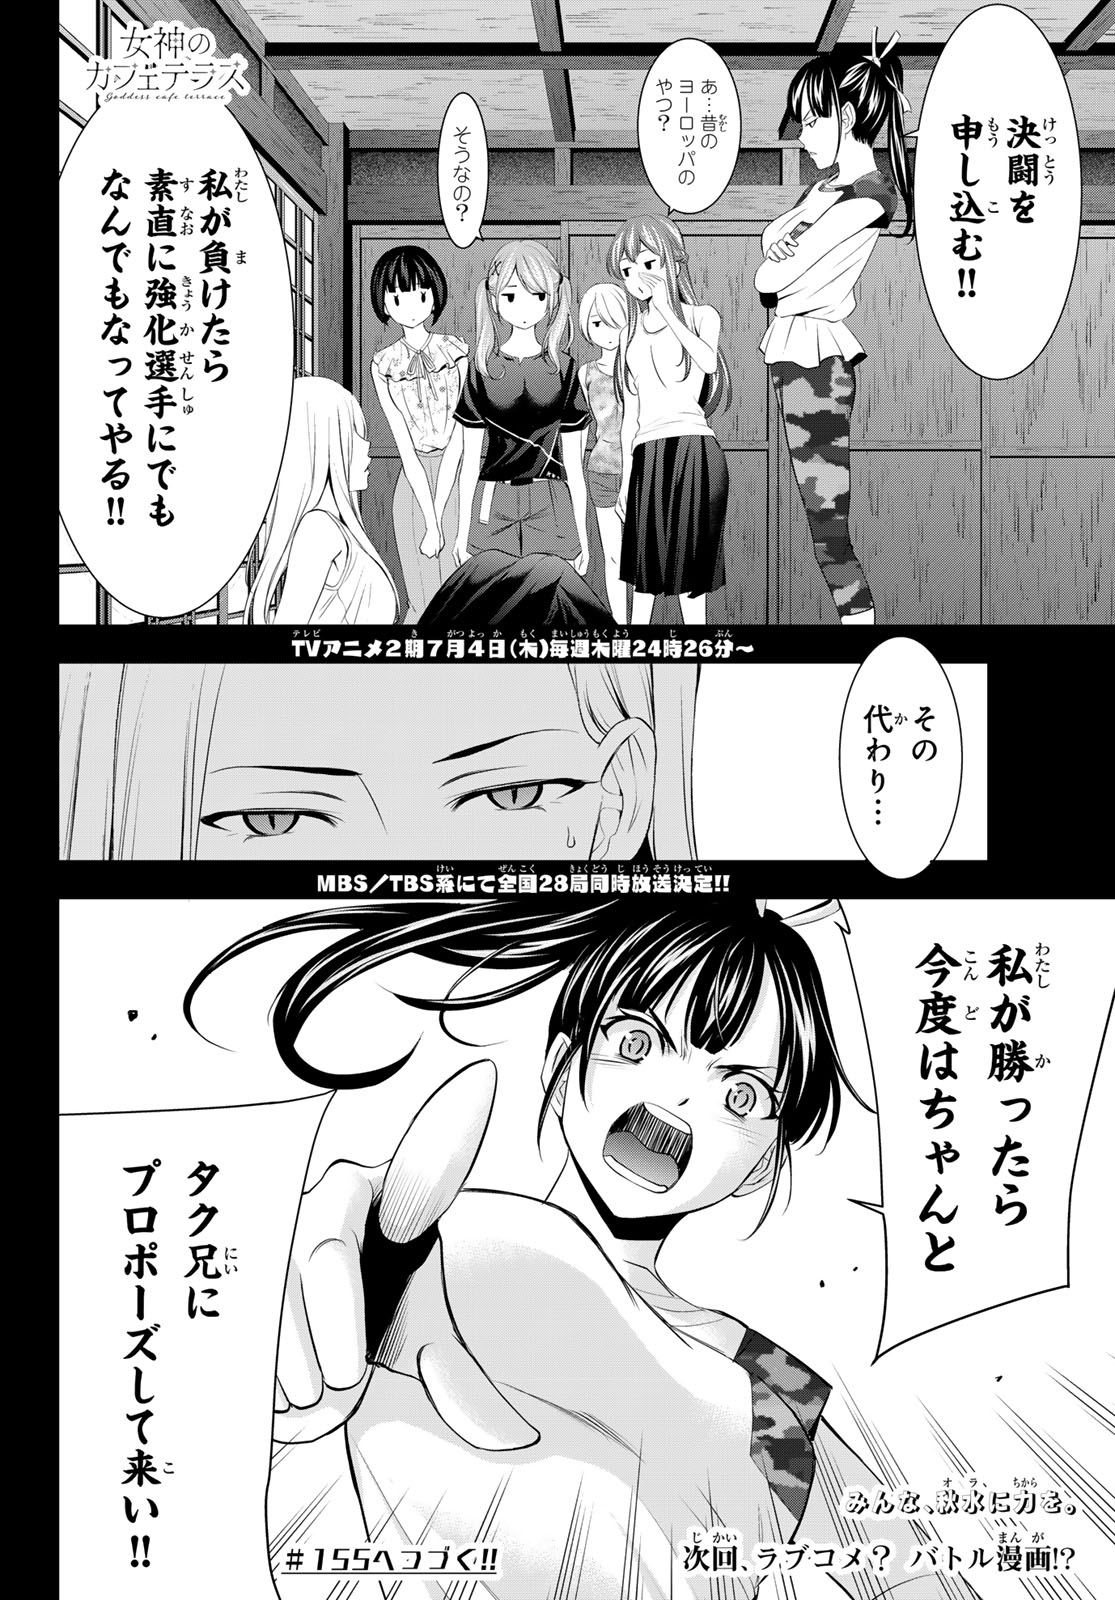 Megami no Cafe Terace - Chapter 154 - Page 18